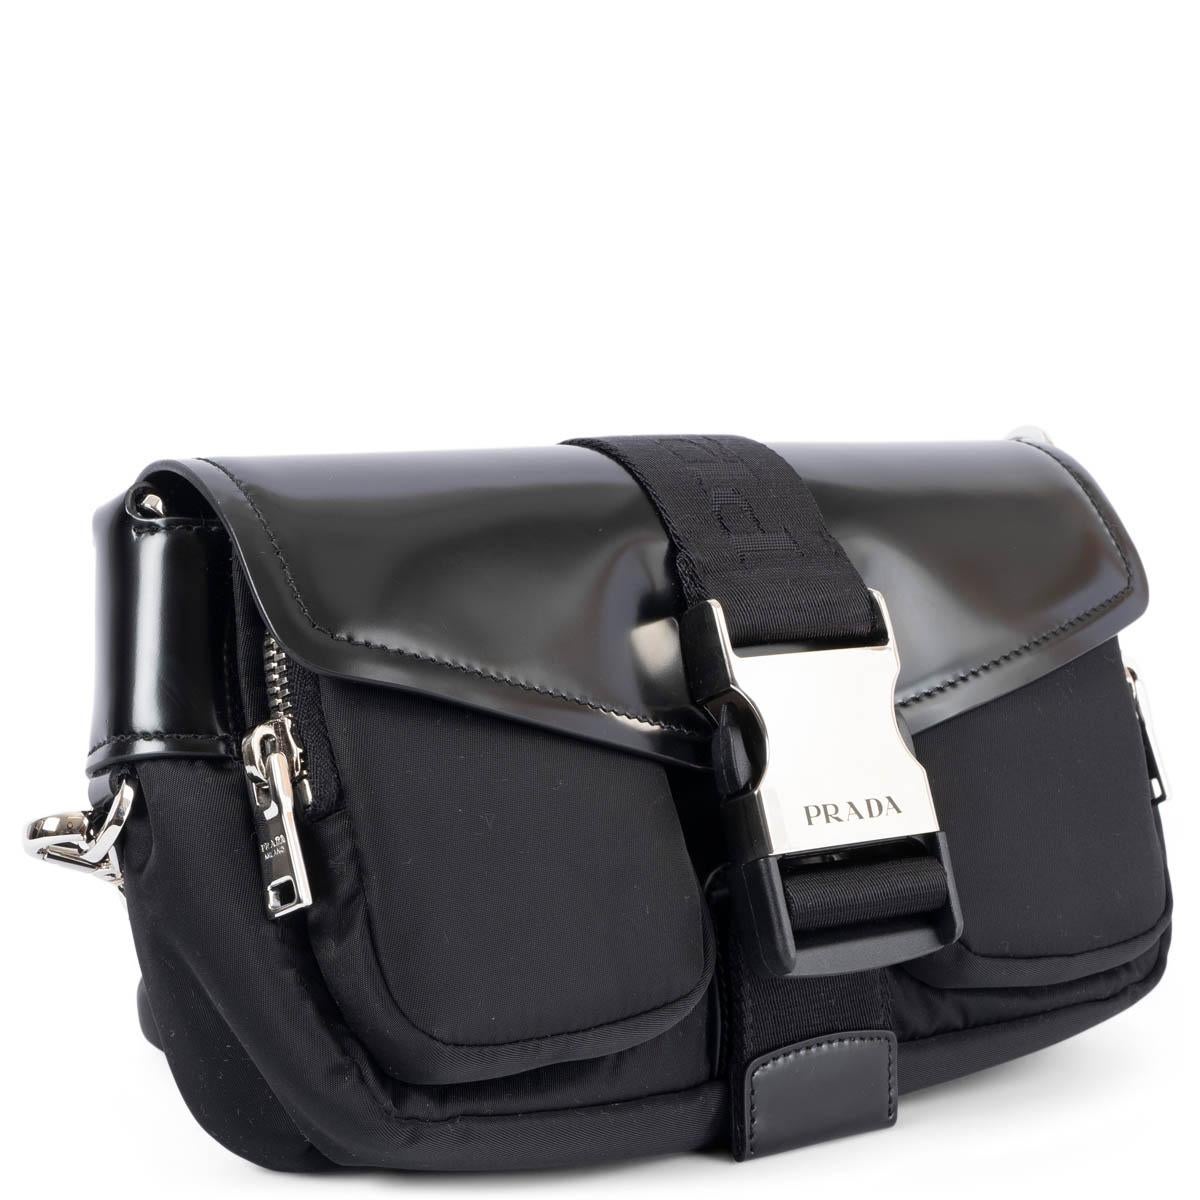 100% authentic Prada Pocket crossbody bag in black nylon with a smooth glossy leather flap. The design features a detachable and adjustable shoulder strap with a detachable zip pocket, silver-tone buckle closure, two zip front pockets and one slit